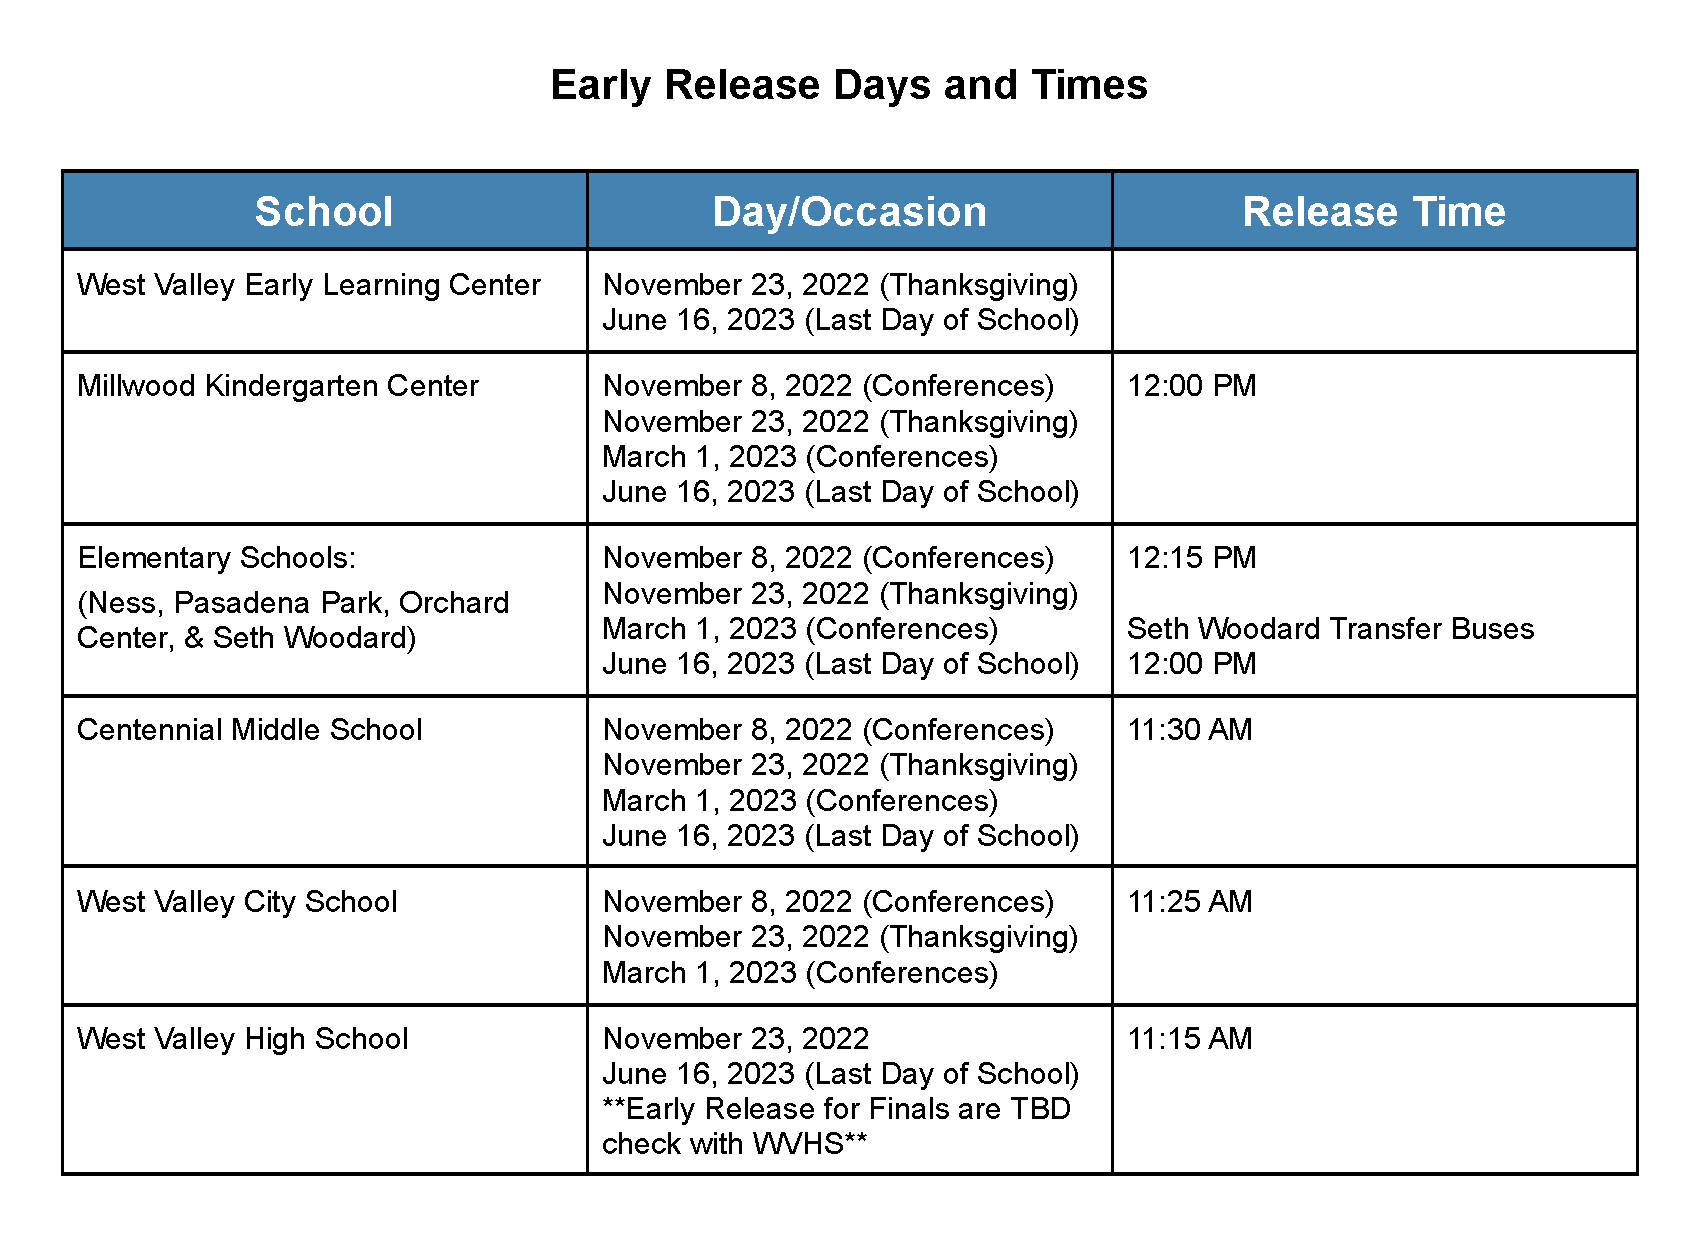 WVSD early release times